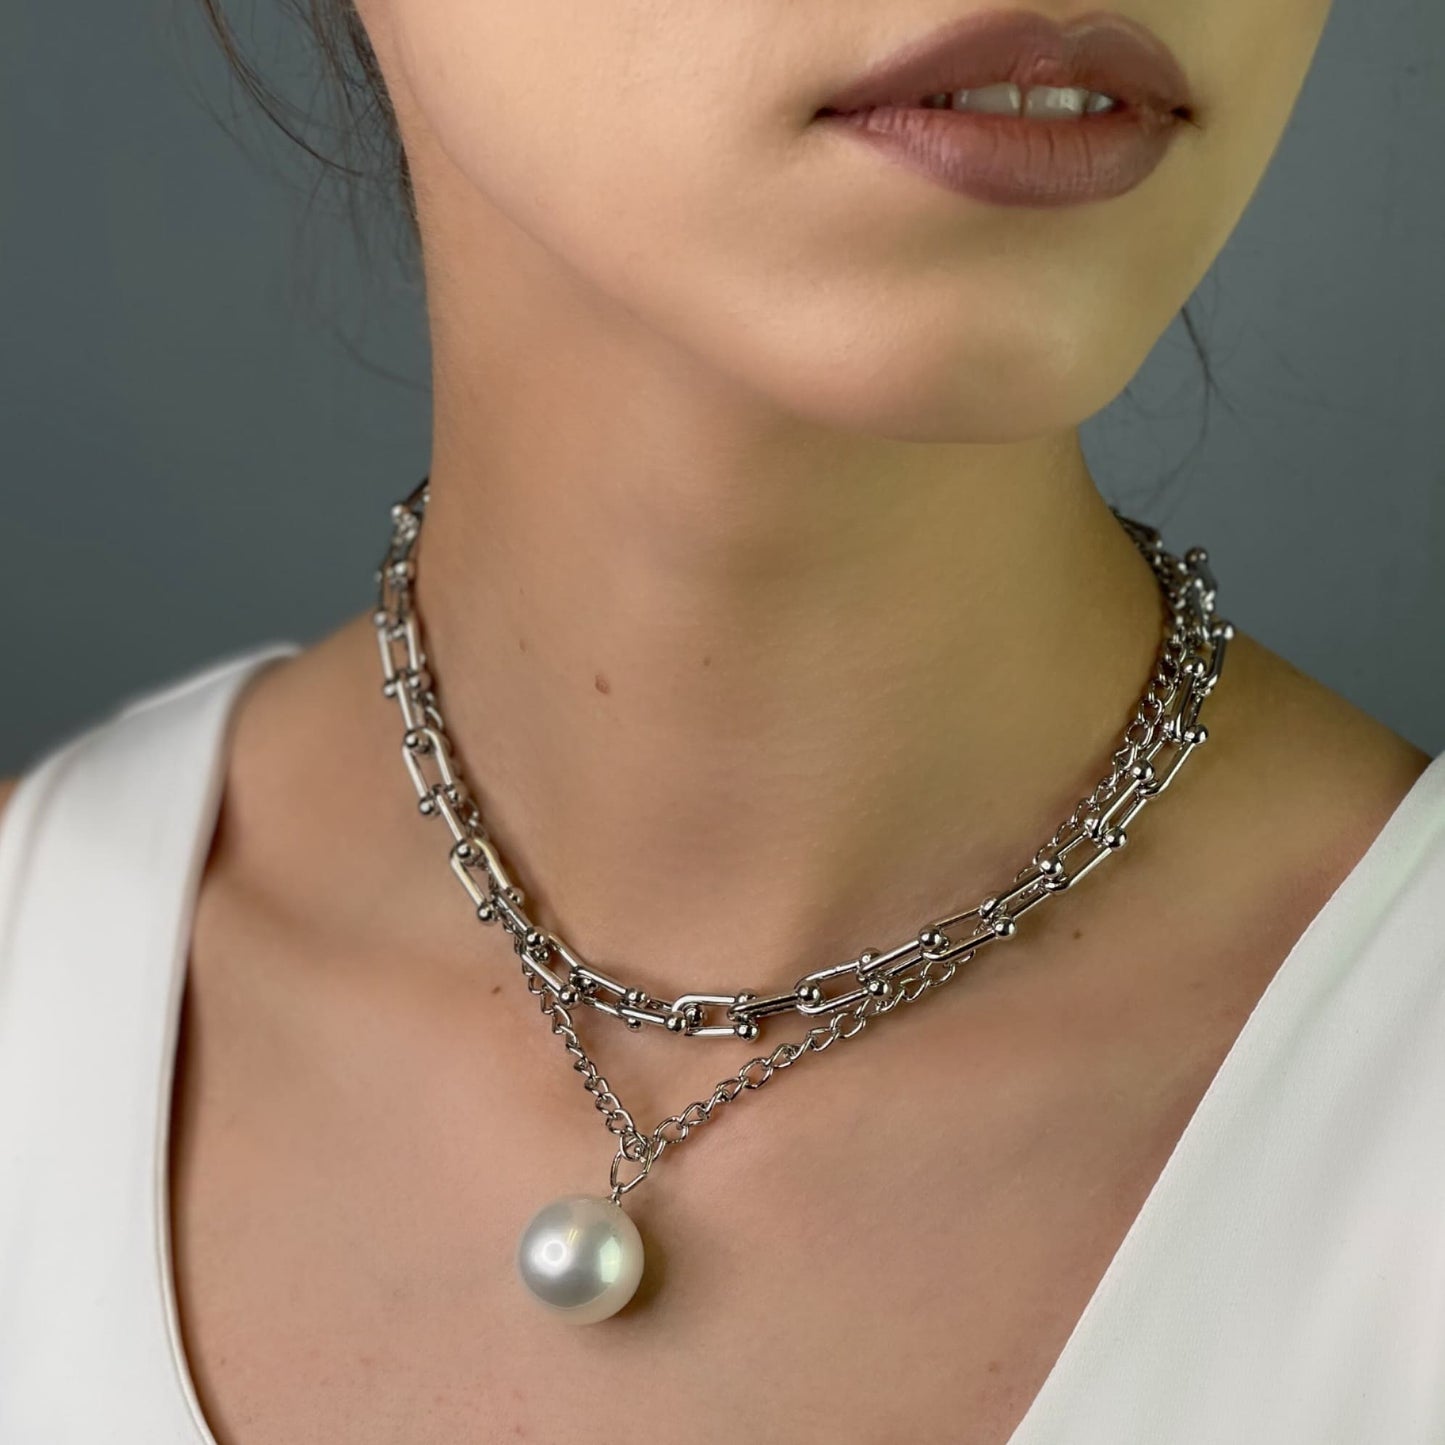 Chain necklace with ball pendant